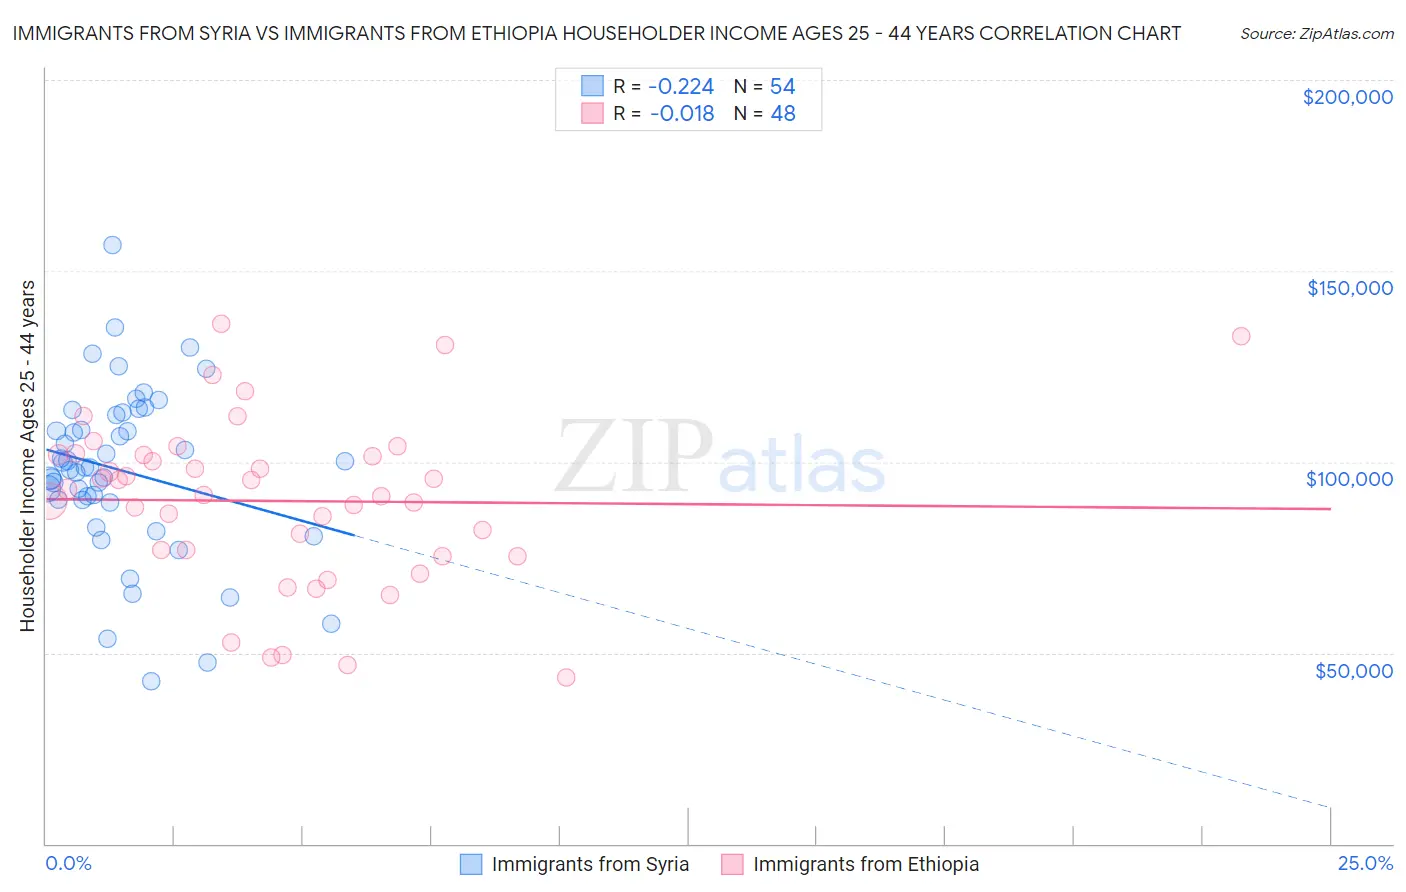 Immigrants from Syria vs Immigrants from Ethiopia Householder Income Ages 25 - 44 years